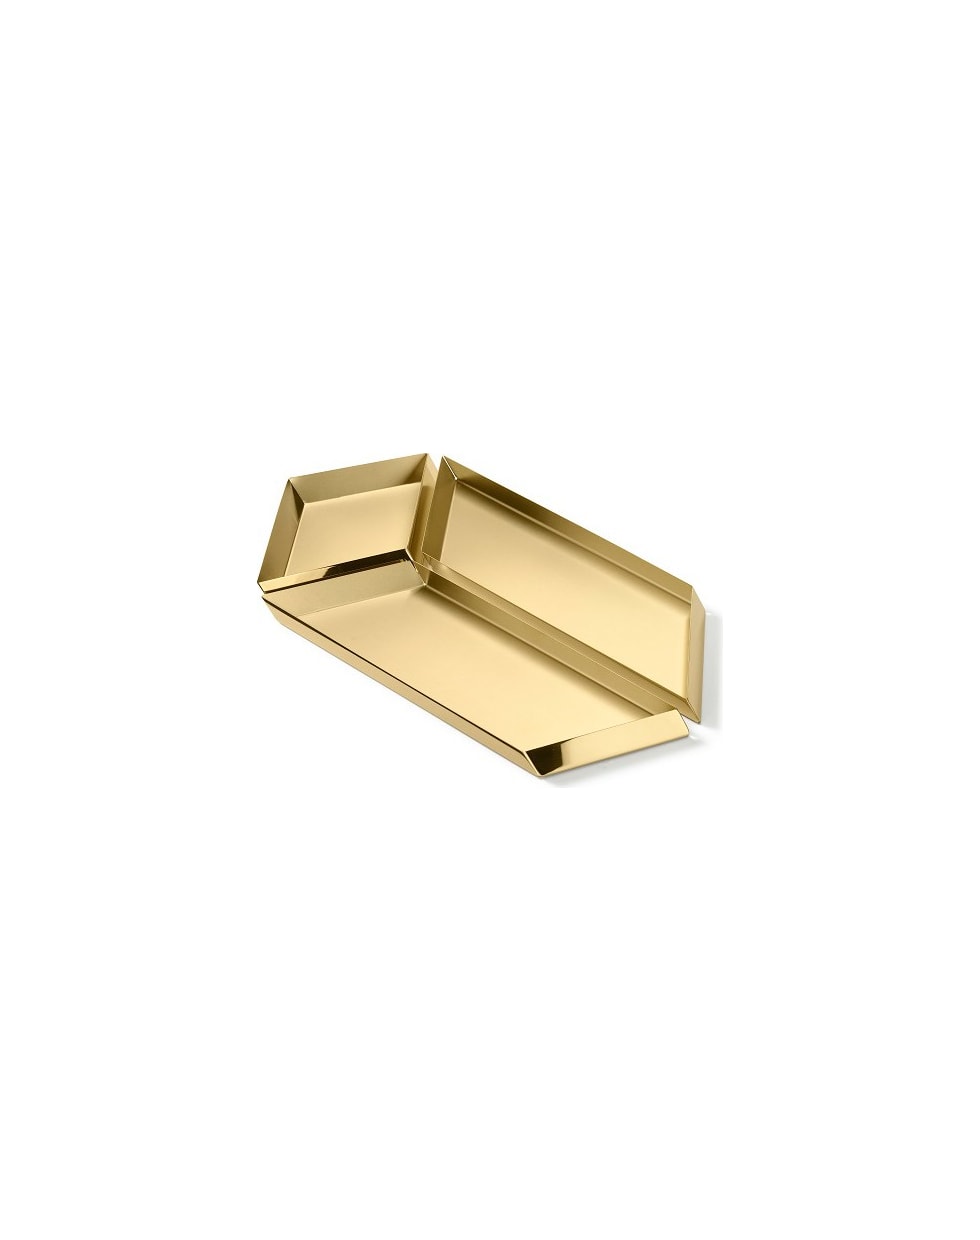 Ghidini 1961 Axonometry - Large Parallelepiped Polished Brass - Polished brass